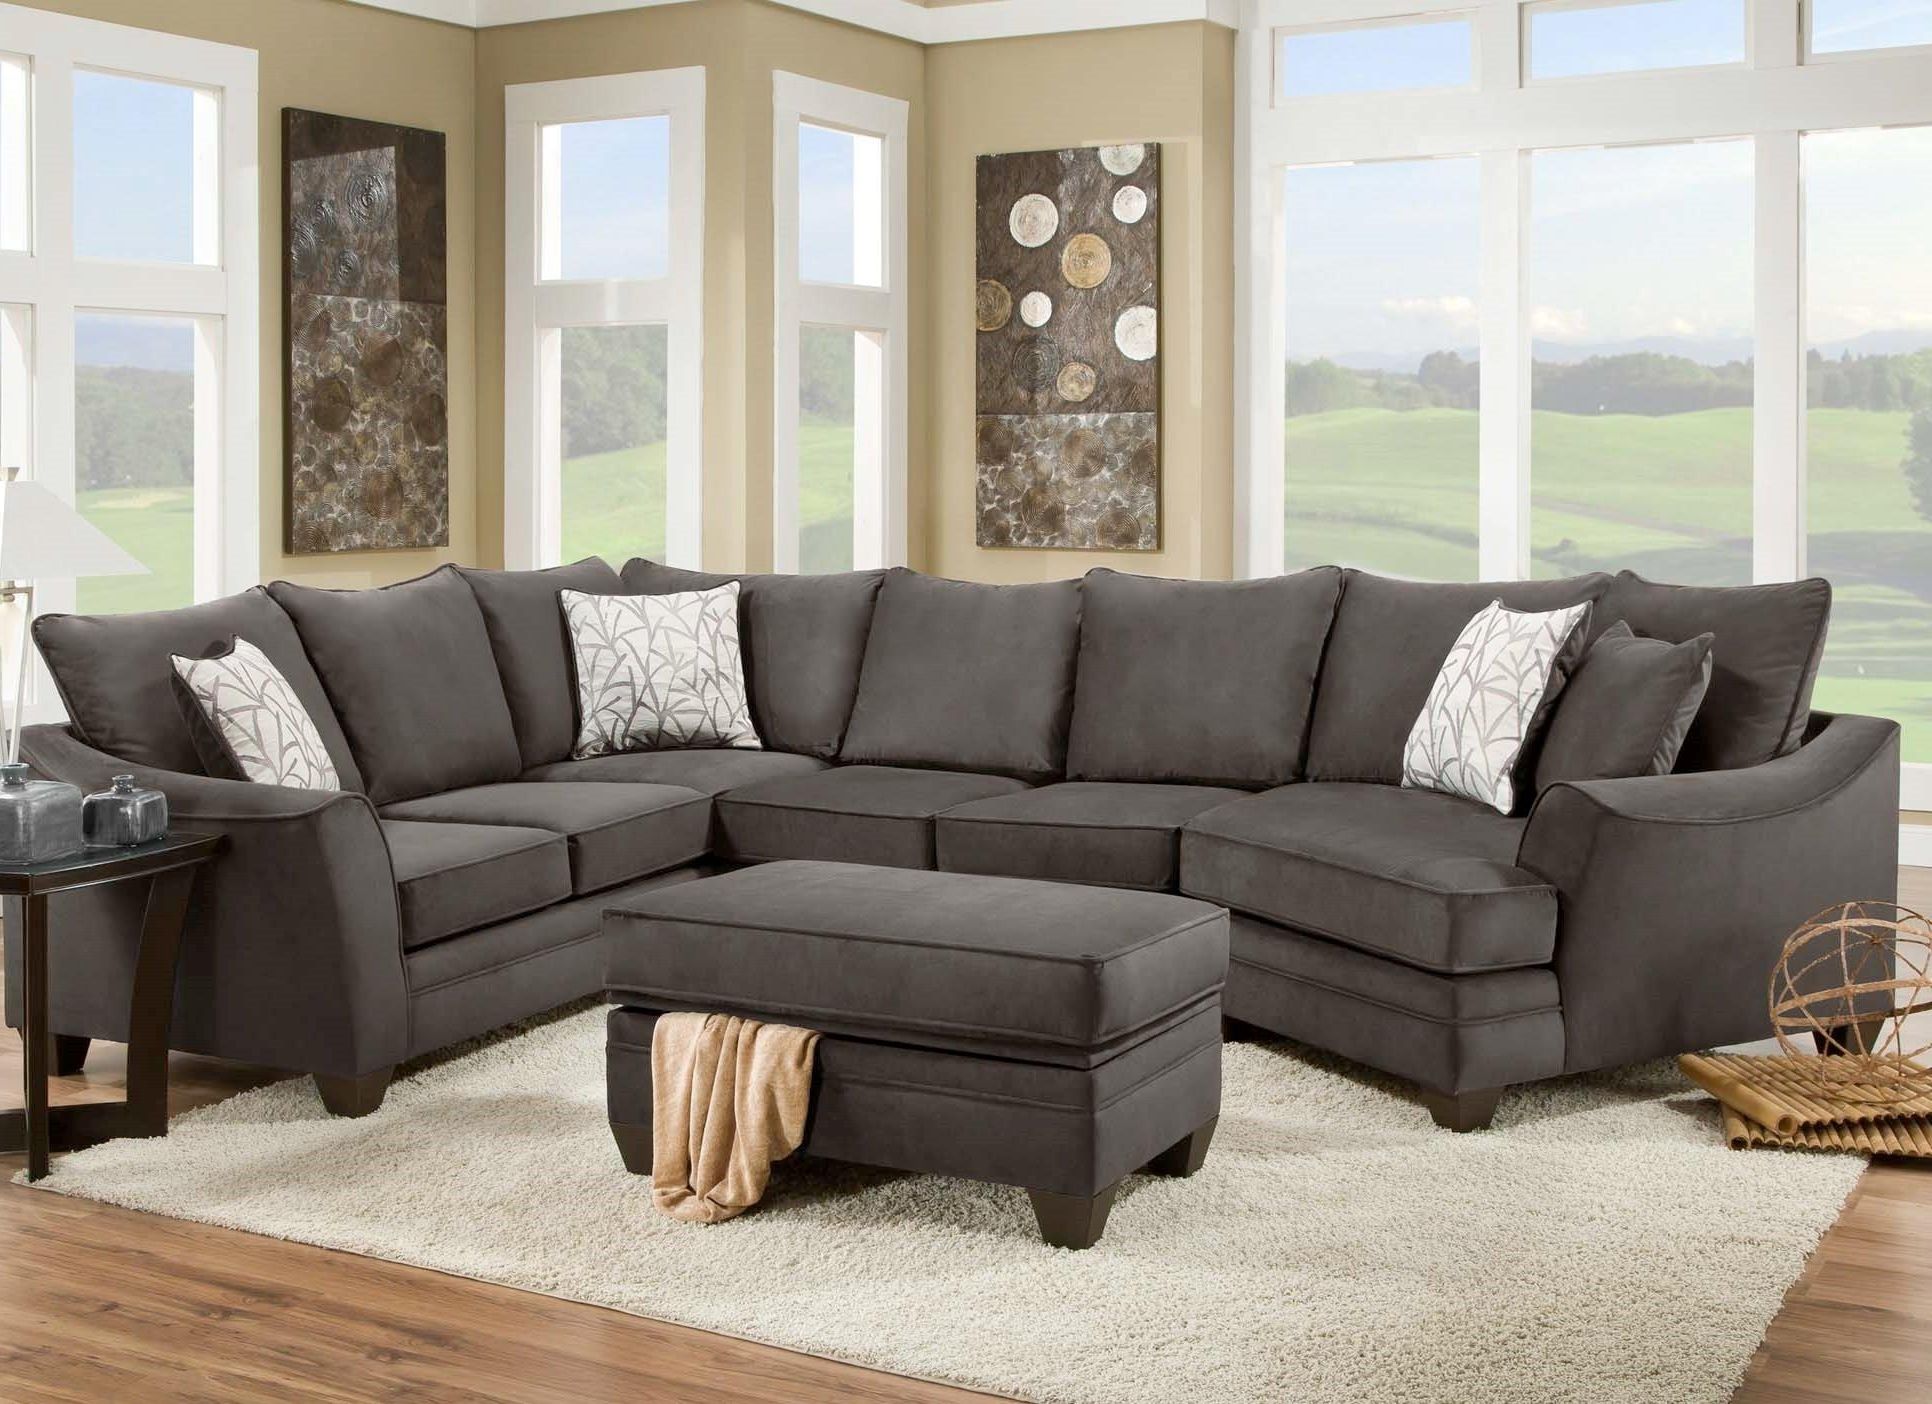 American Furniture 3810 Sectional Sofa That Seats 5 With Left Side Within Preferred Hattiesburg Ms Sectional Sofas (View 6 of 20)